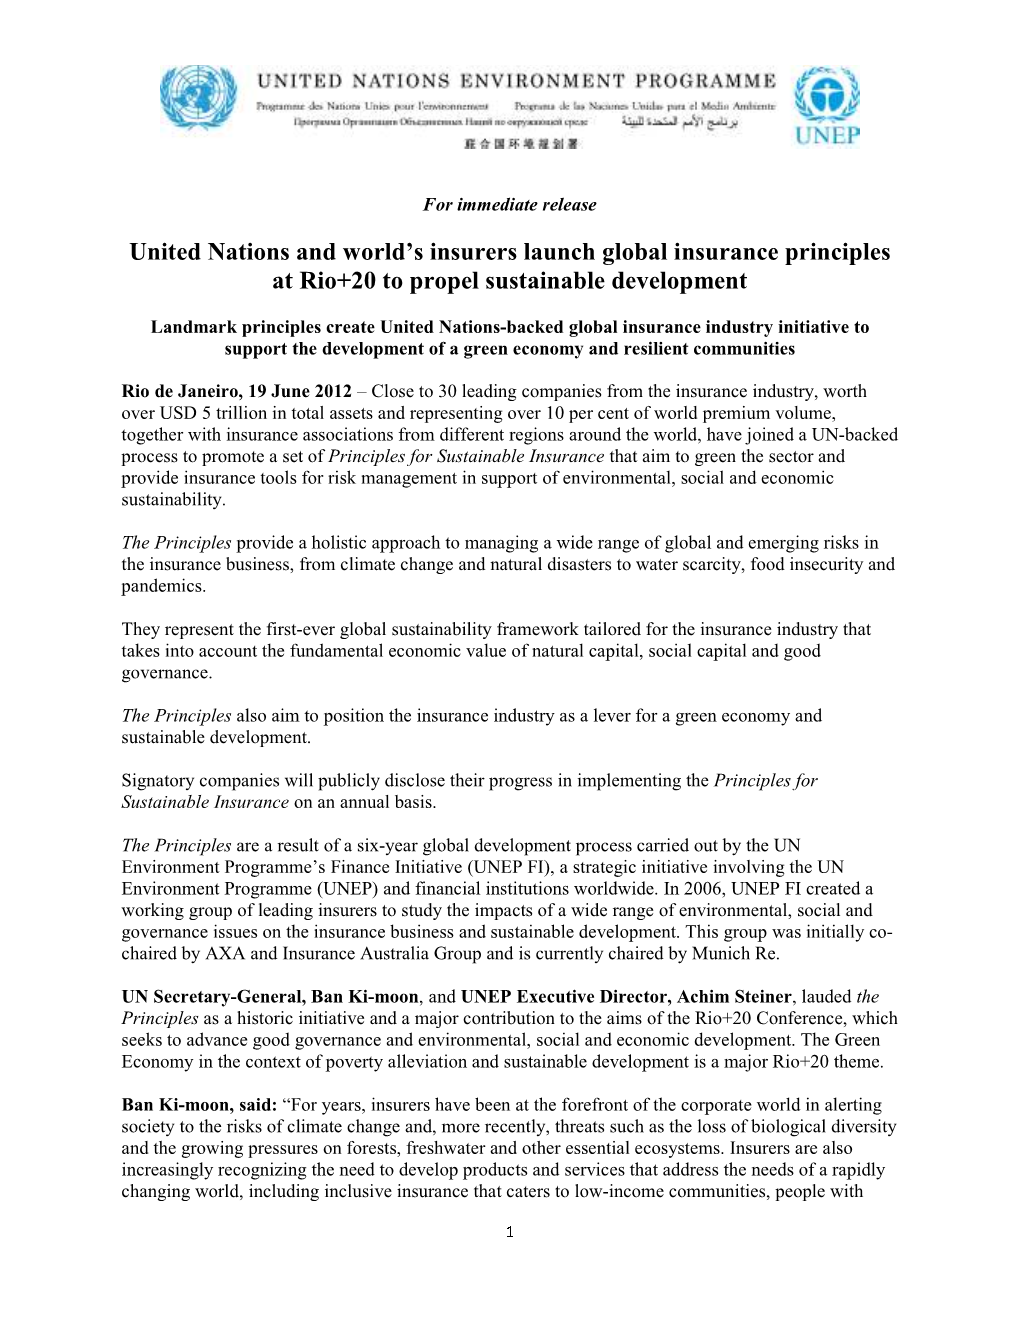 United Nations and World's Insurers Launch Global Insurance Principles